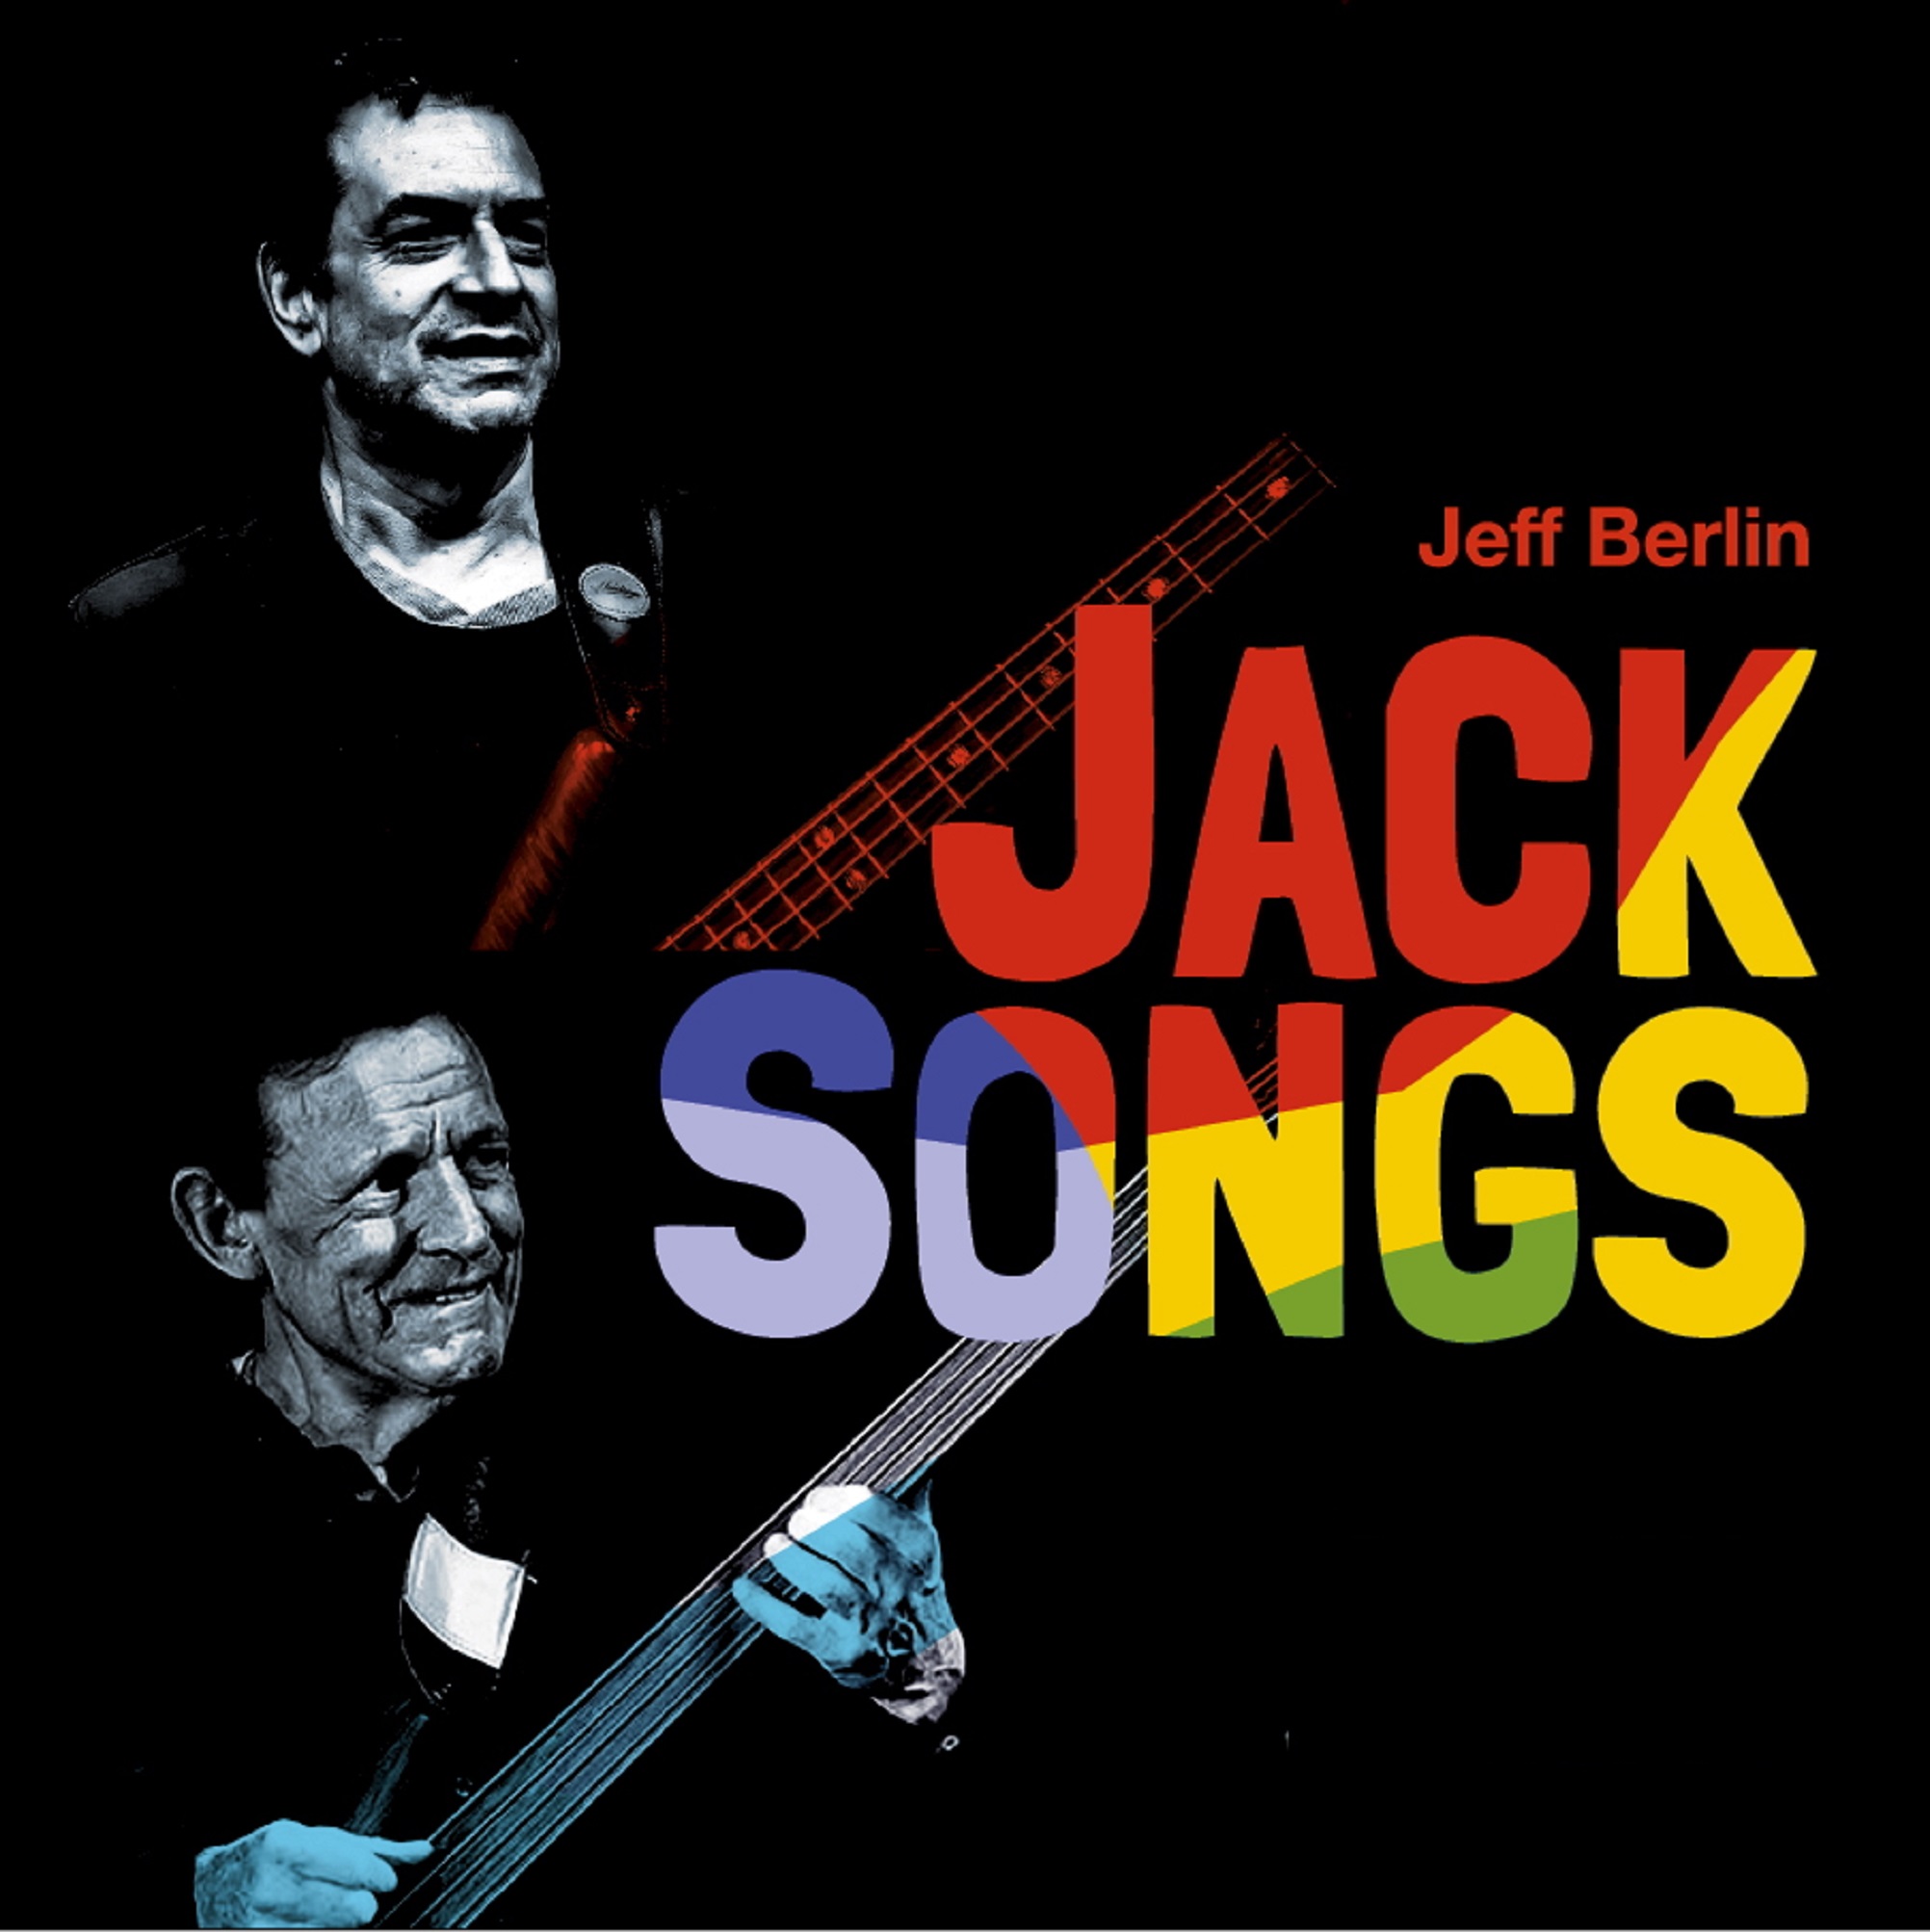 Bass Icon Jeff Berlin To Release New Tribute Album To Legendary Jack Bruce “Jack Songs”